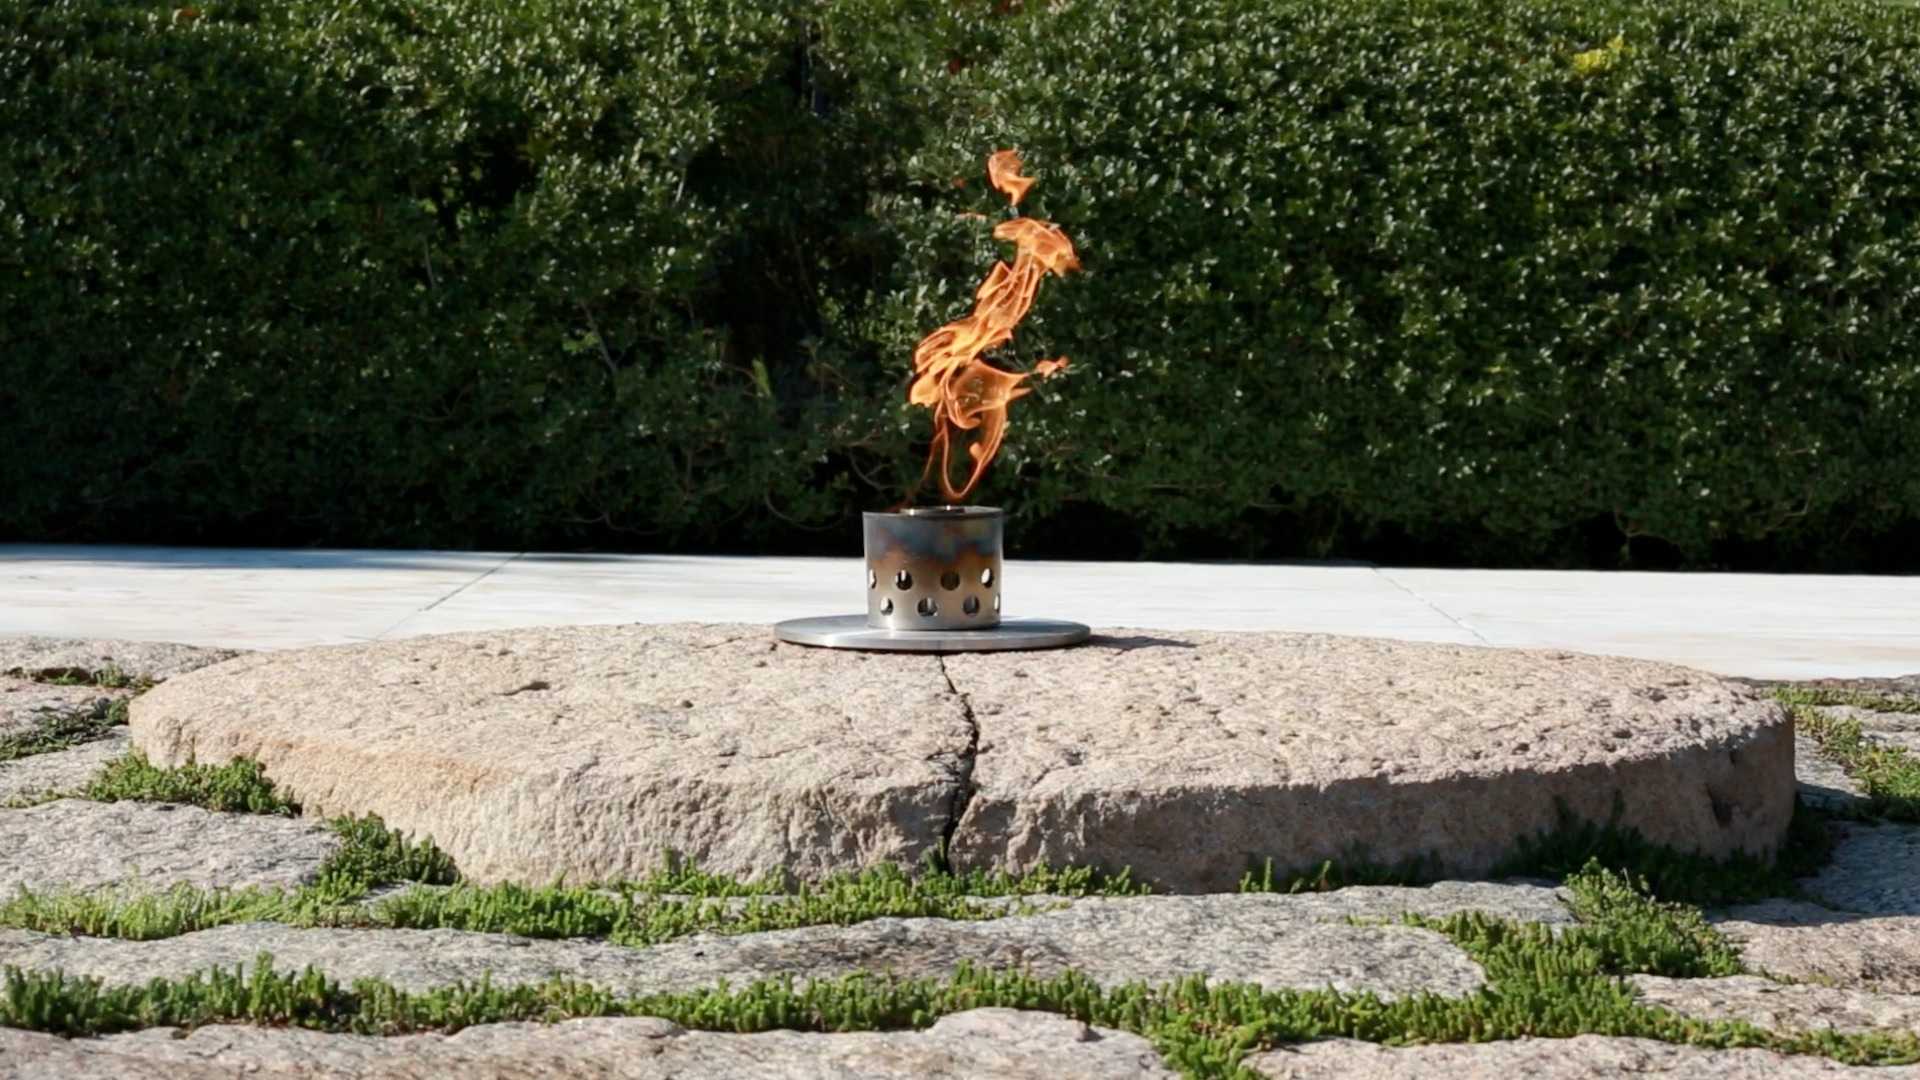 JFK Facts - In 1963, a group of Catholic schoolchildren visiting the JFK eternal flame sprinkled it with holy water, accidentally extinguishing it.-u/noahbodty